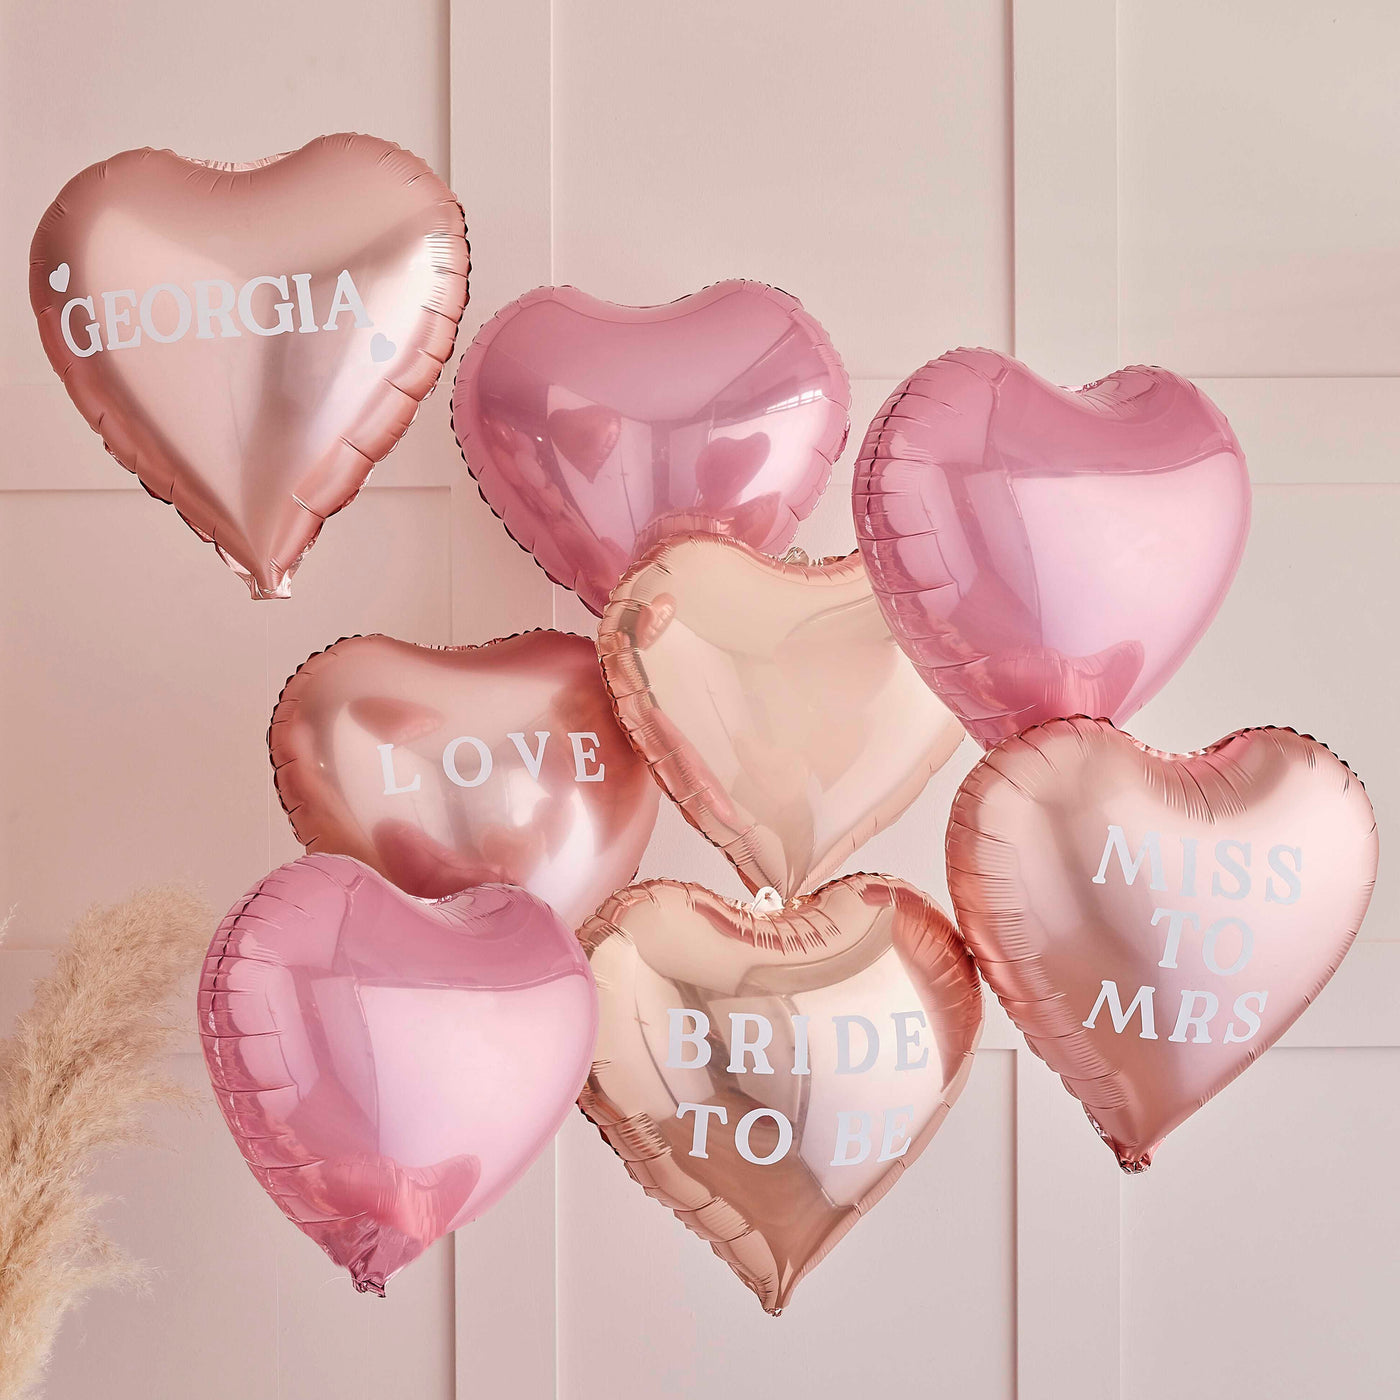 Customisable Hen Party Heart Balloons With Stickers